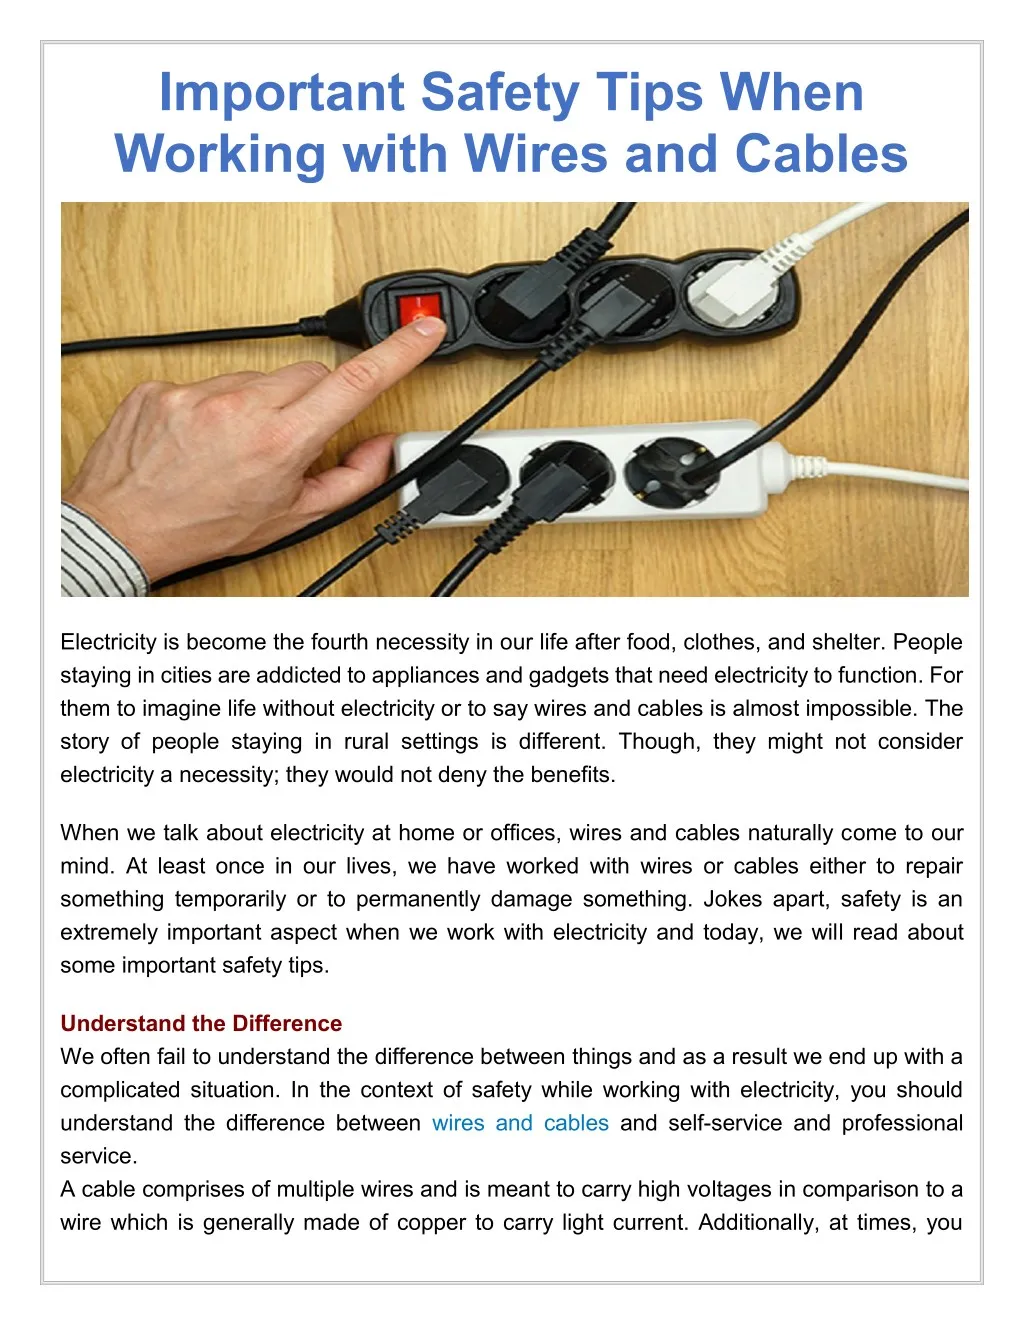 PPT - Important Safety Tips When Working with Wires and Cables ...